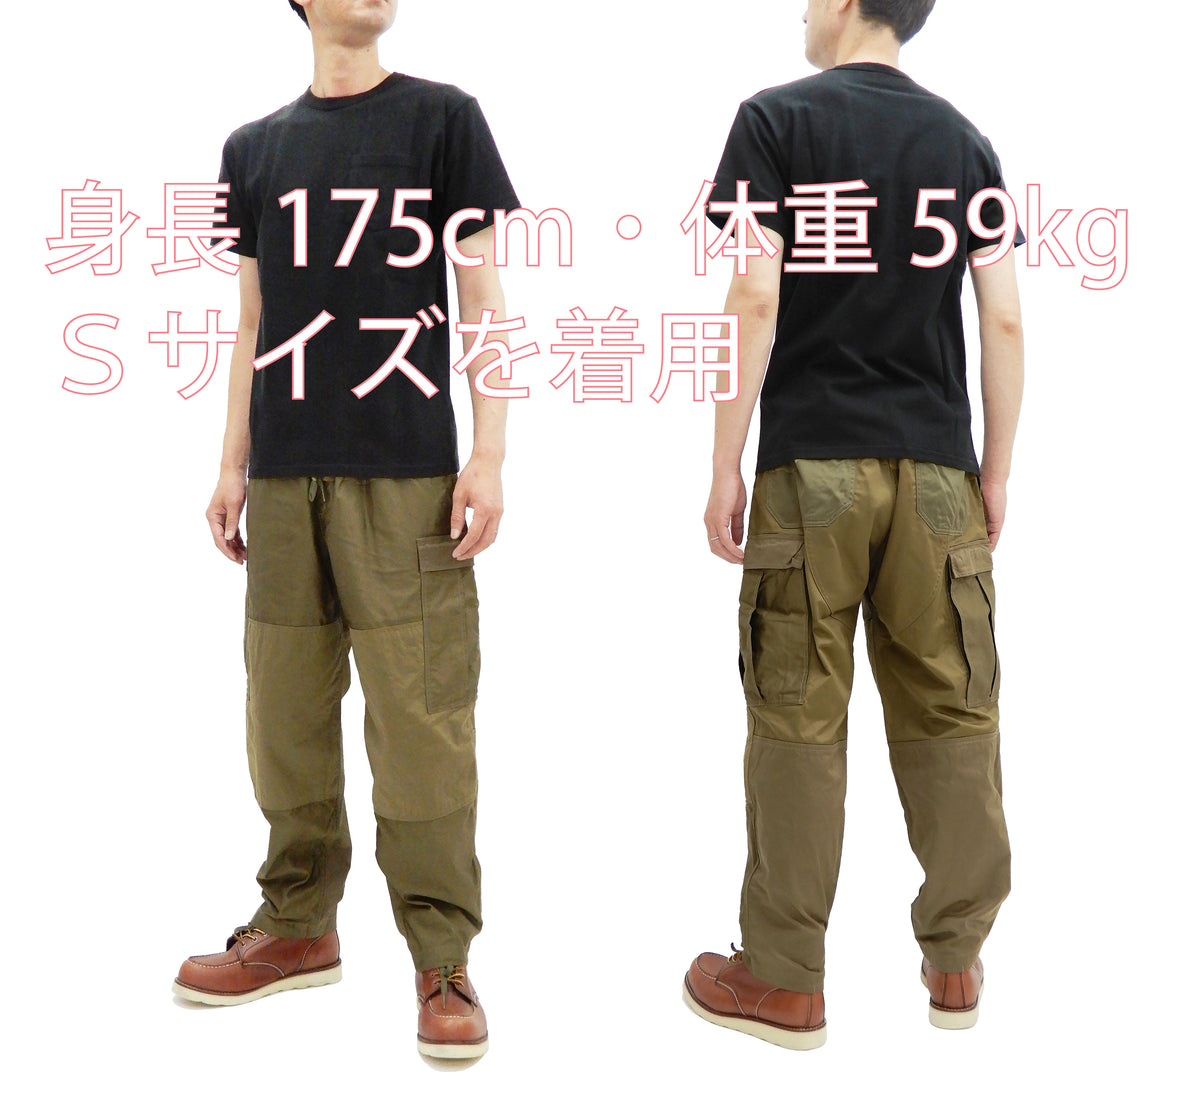 Moduct Cargo Pants Men's Military Style Color Block Elastic Waist